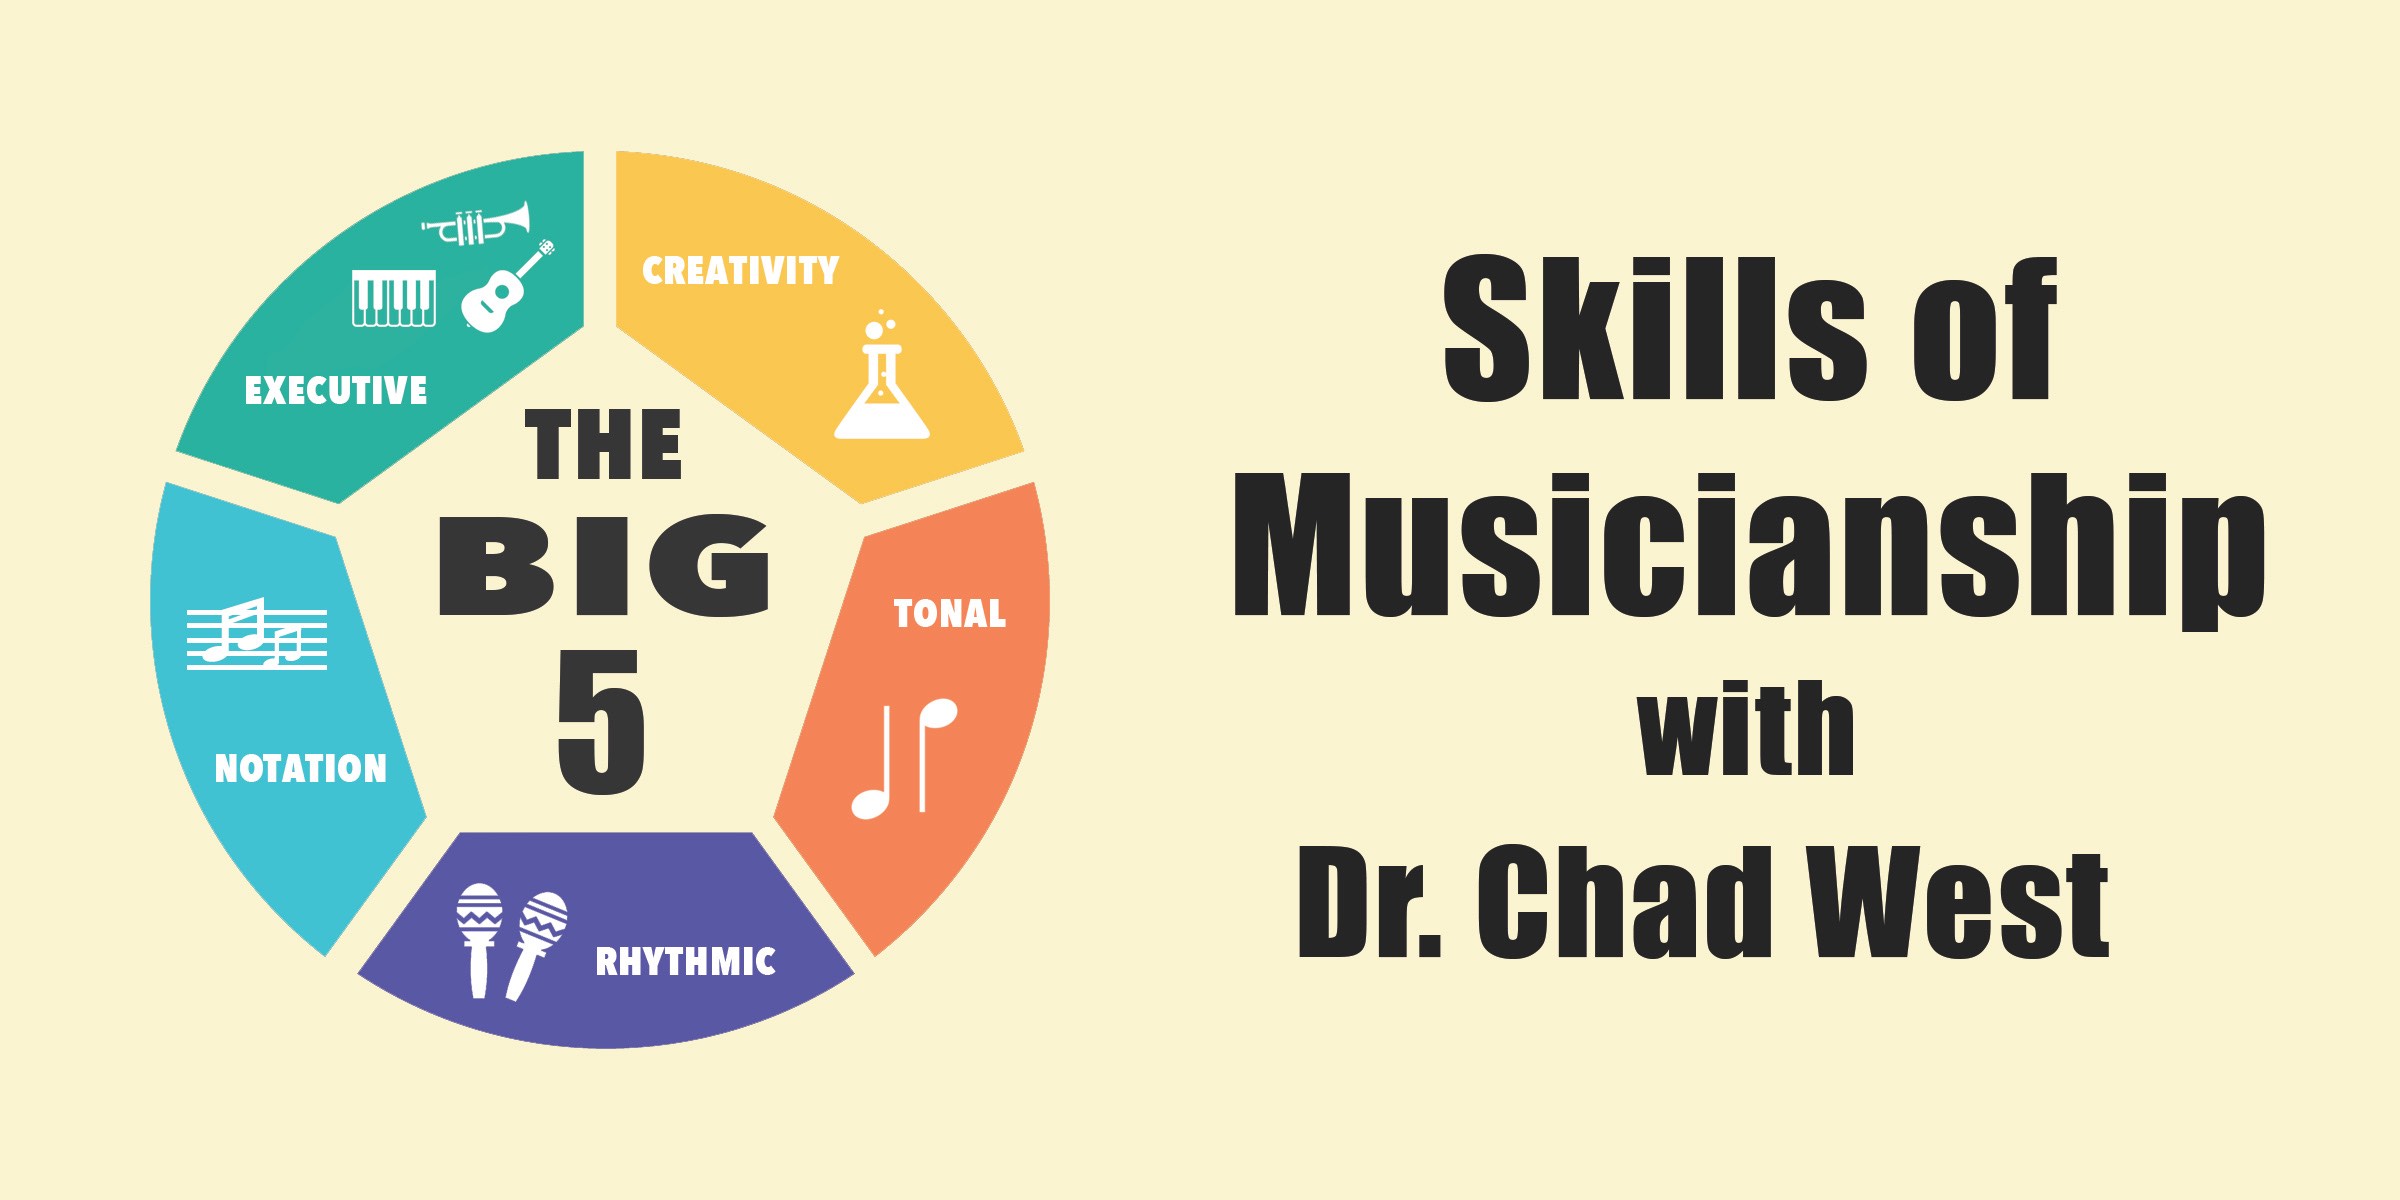 The "Big 5" Skills of Modern Musicianship, with Dr. Chad West (Interview)